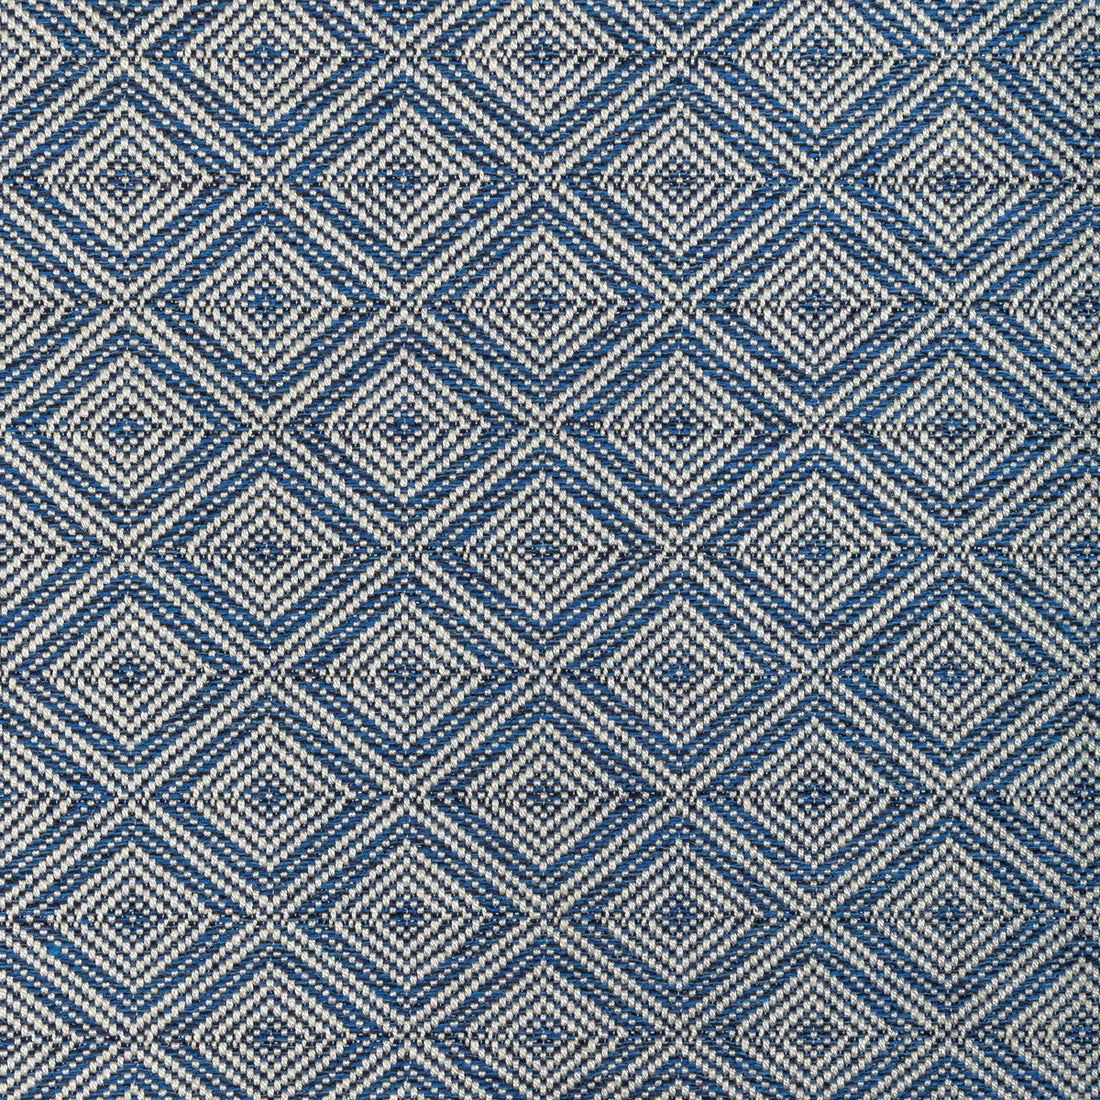 Calvin Weave fabric in blue color - pattern 8022114.5.0 - by Brunschwig &amp; Fils in the Lorient Weaves collection